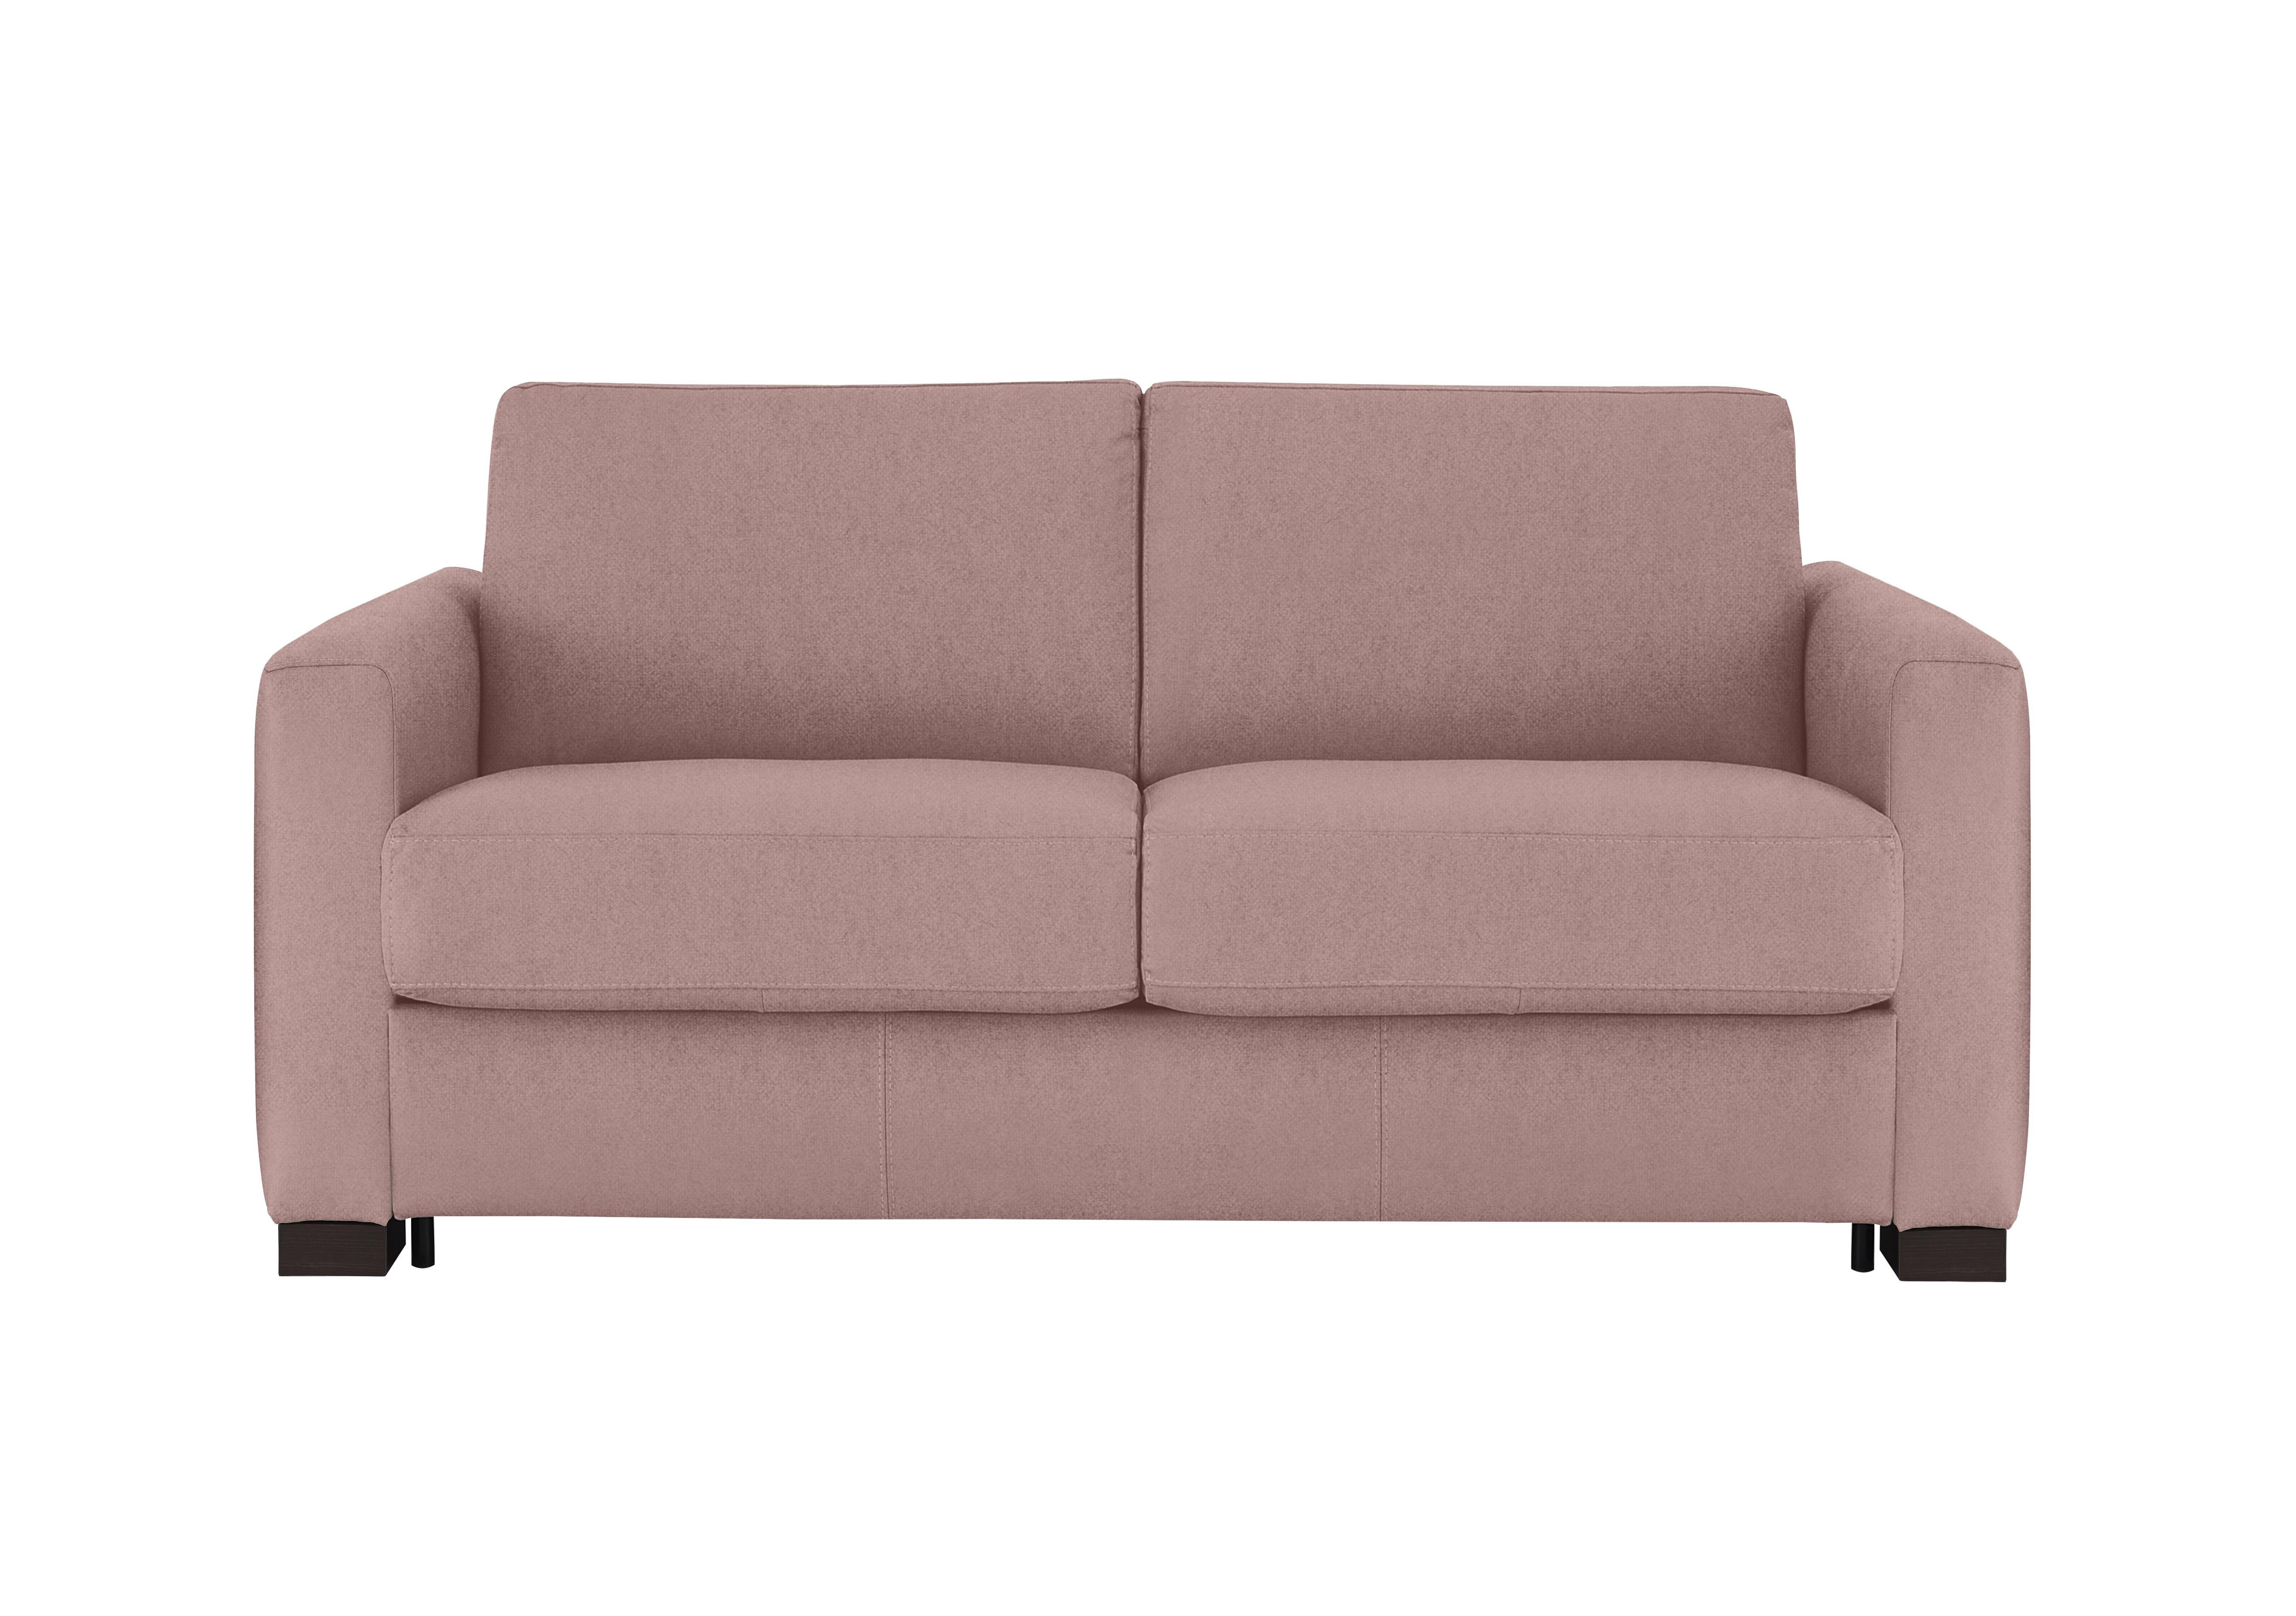 Alcova 2 Seater Fabric Sofa Bed with Box Arms in Fuente Coral on Furniture Village